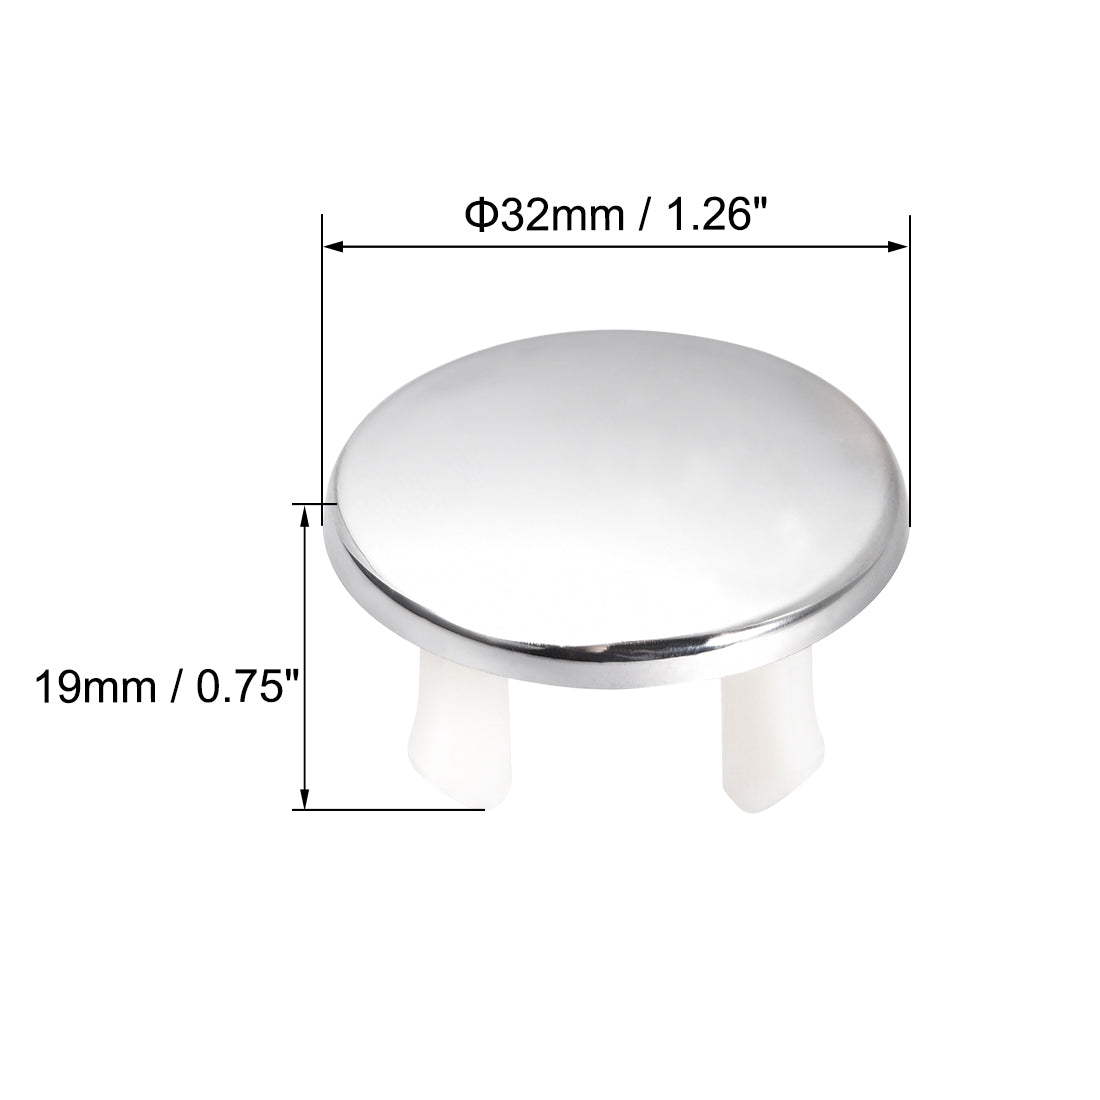 uxcell Uxcell Sink Overflow Covers Round Hole Caps Insert Spares for Bathroom Basin Kitchen 3 Pcs